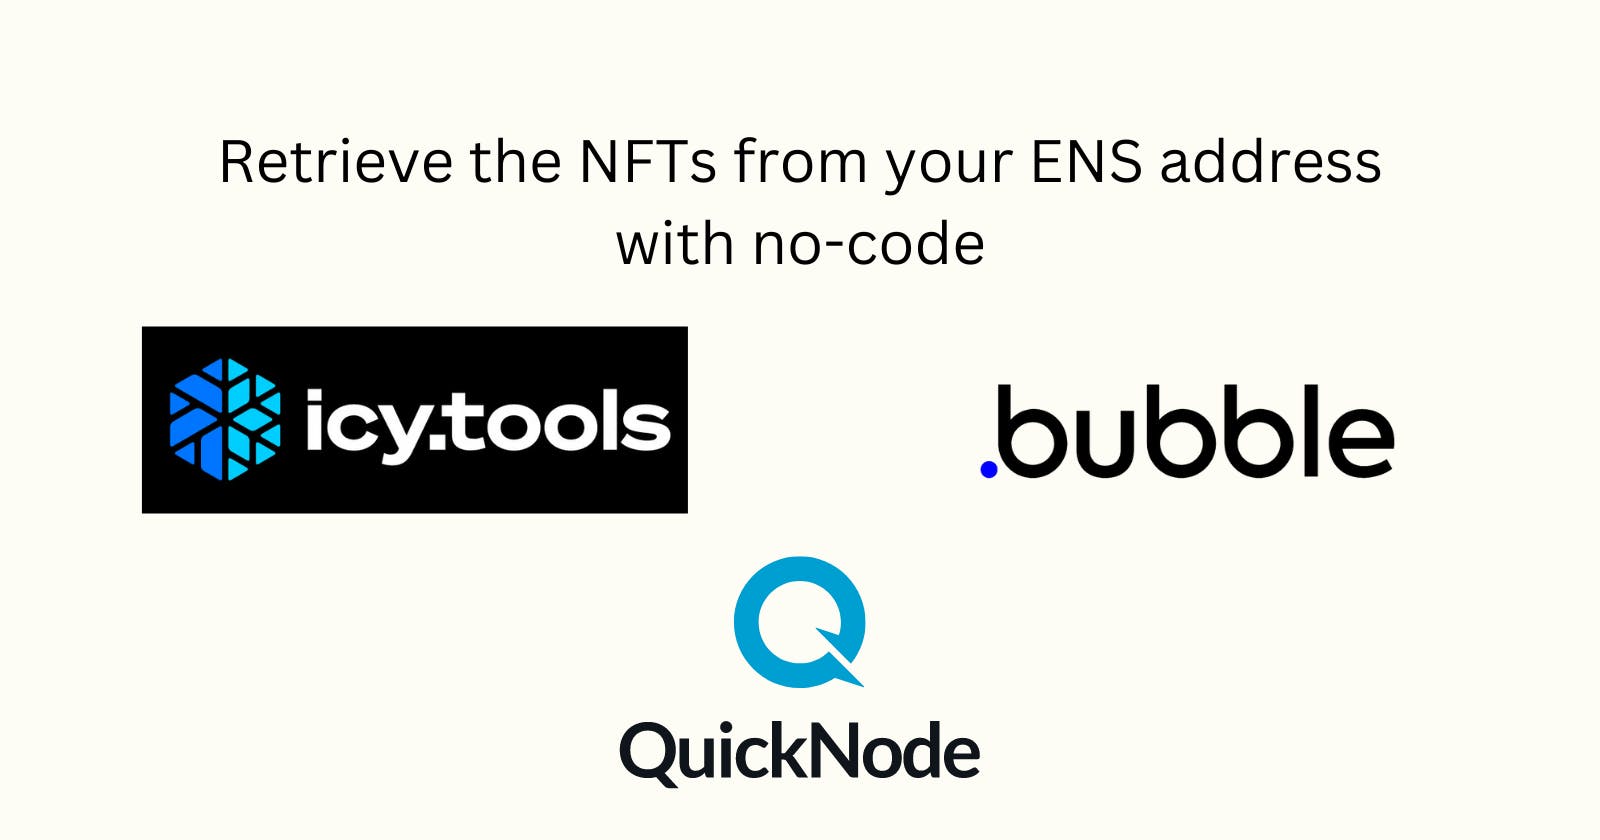 Retrieve the NFTs from your ENS address with no-code